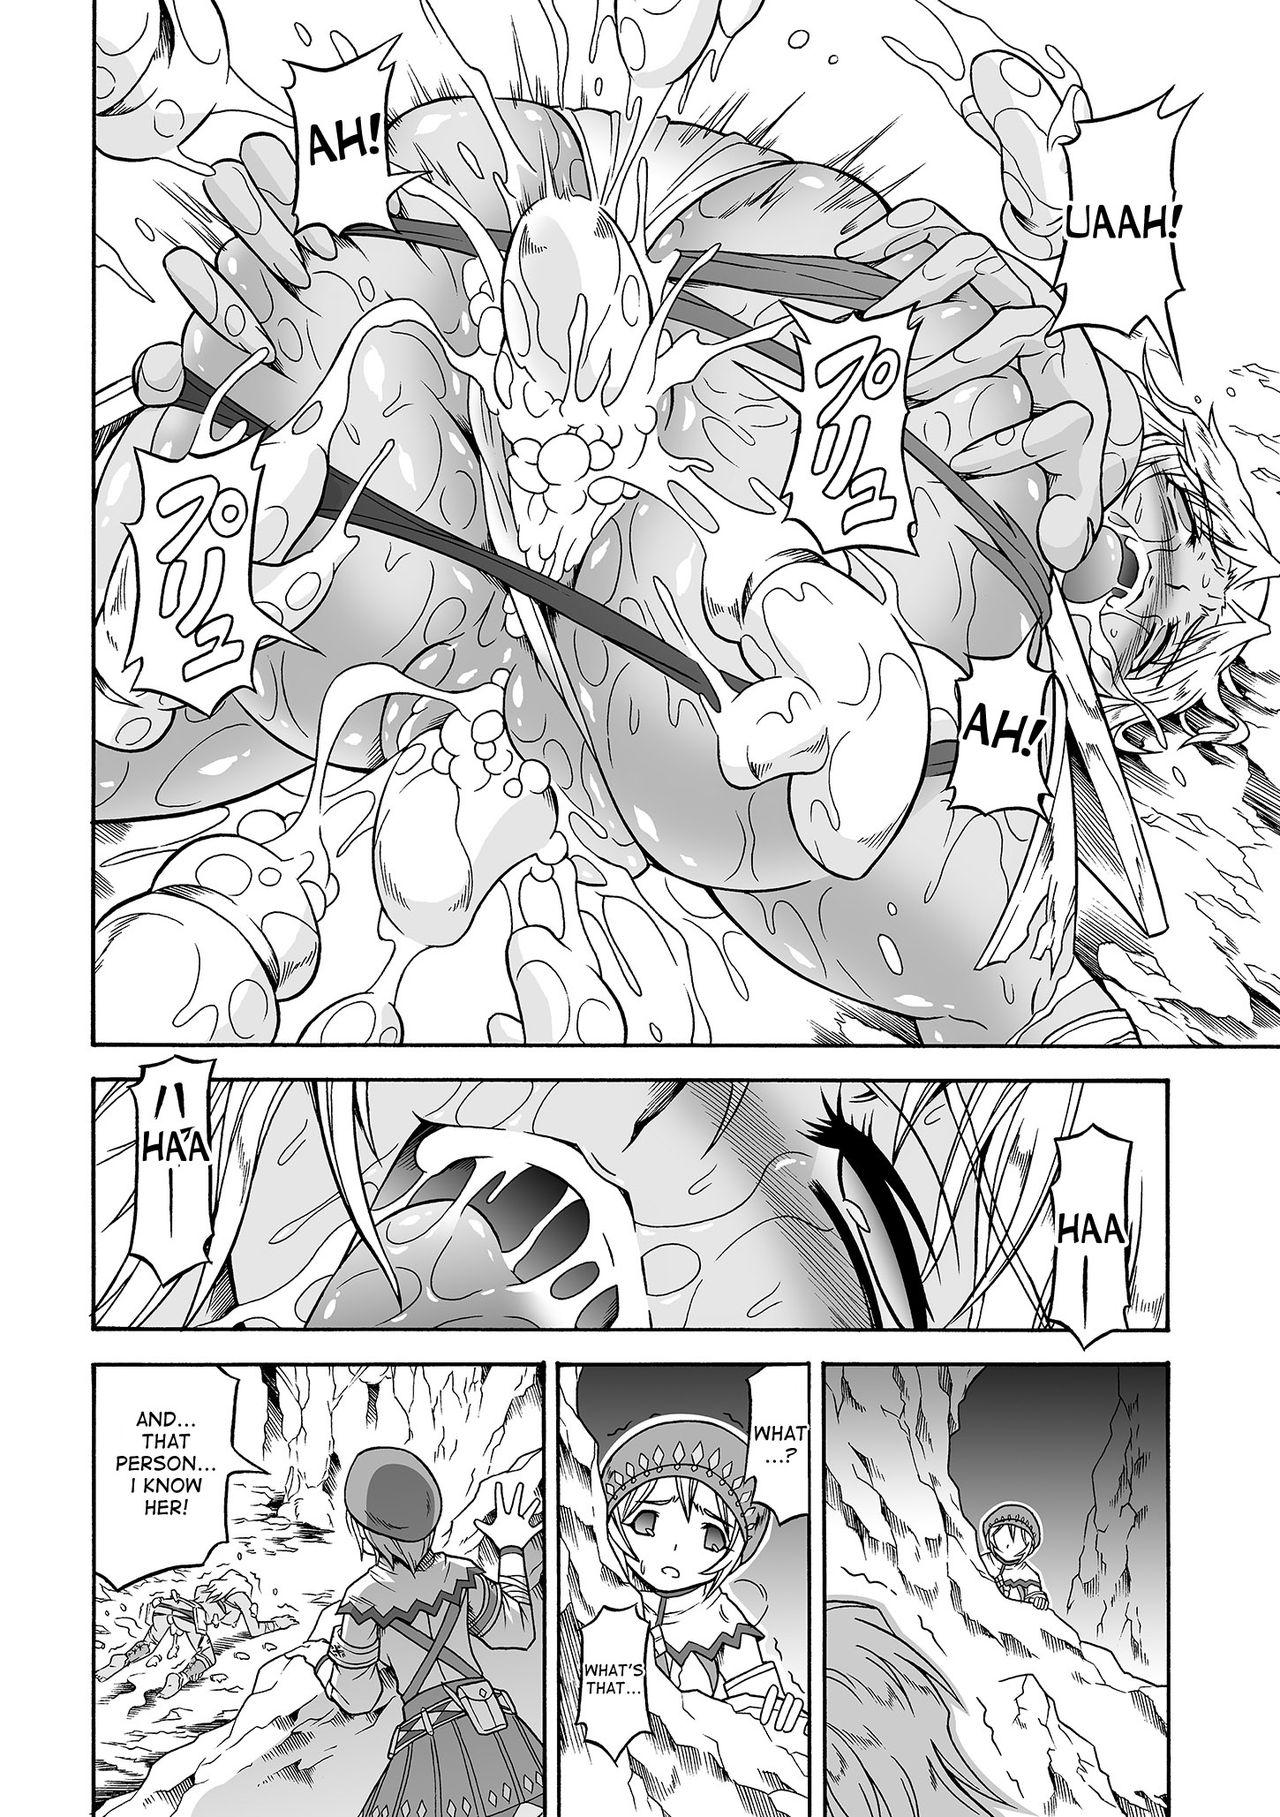 Sex Solo Hunter no Seitai 4.1 THE SIDE STORY - Monster hunter Cei - Page 6